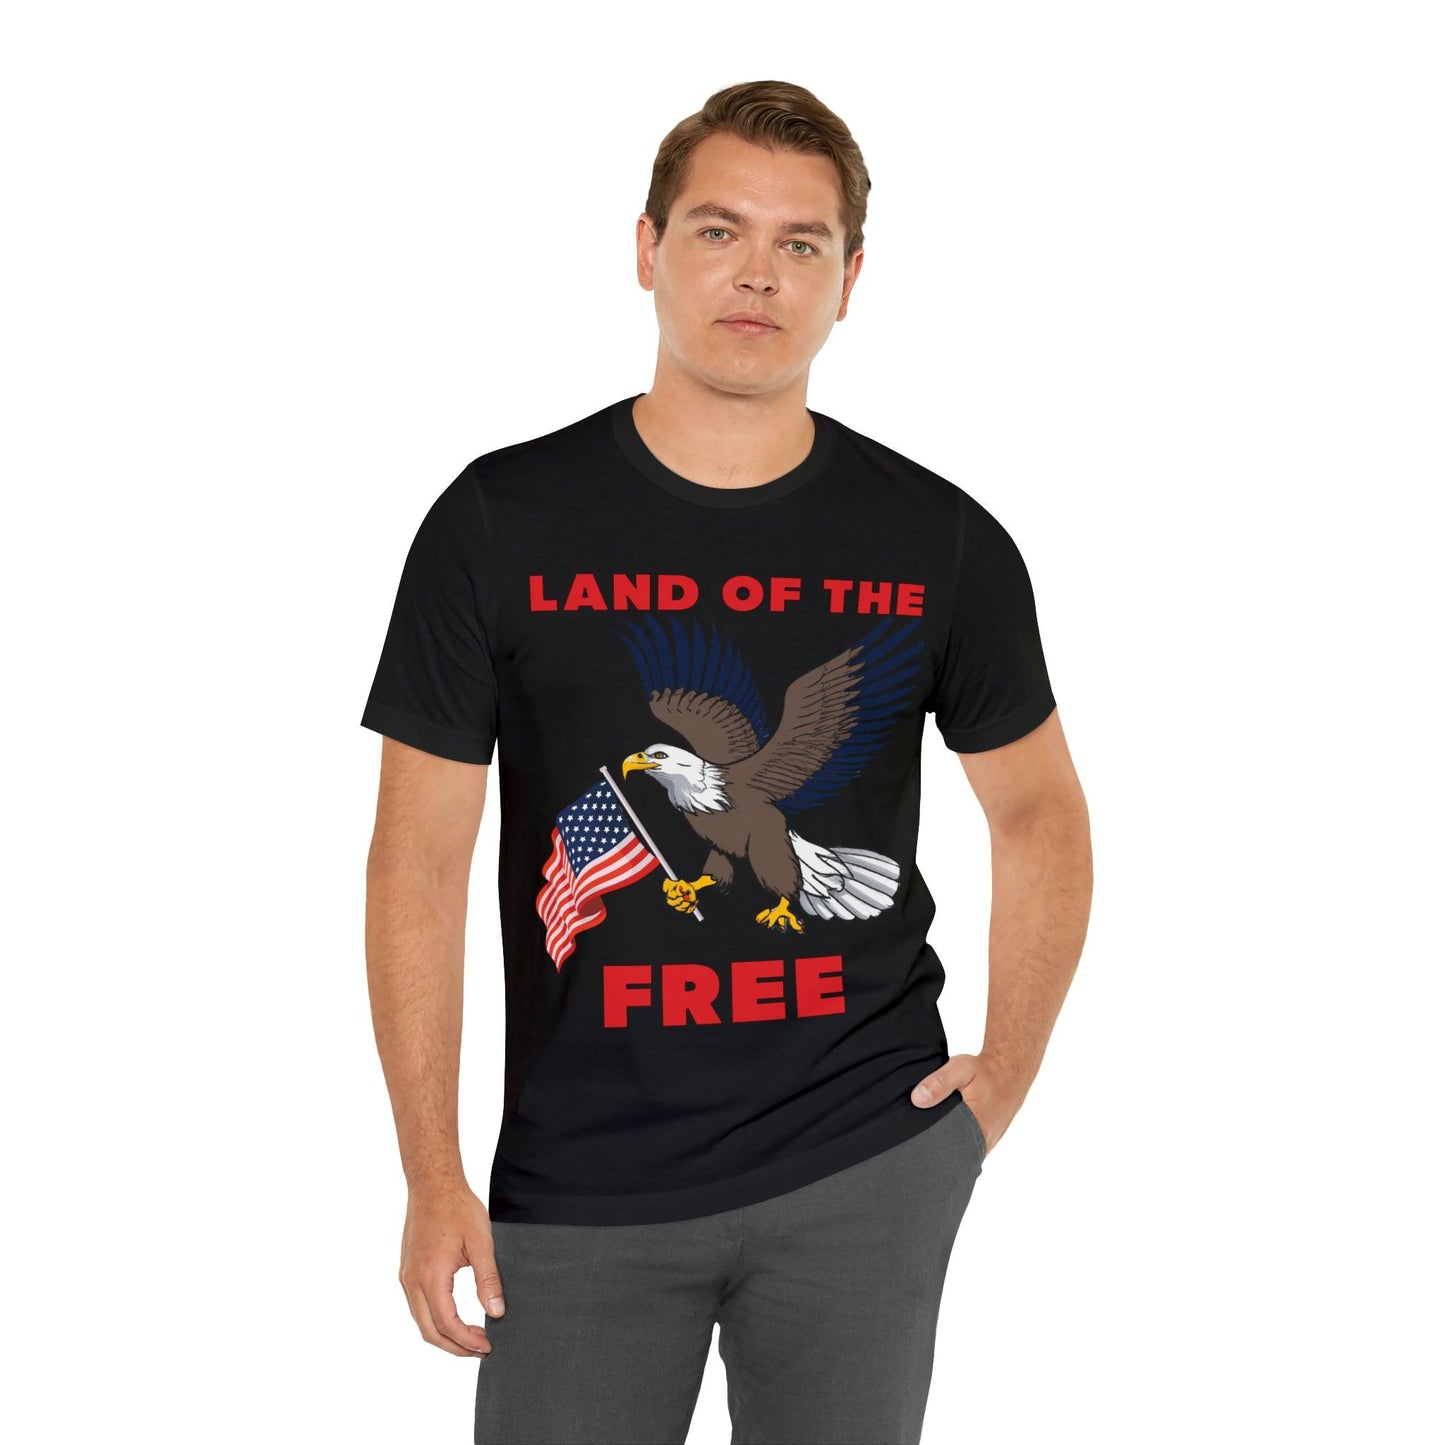 Land of the Free: Celebrate Independence Day with Patriotic Shirts, Flag shirt - Freedom, Fireworks, and More